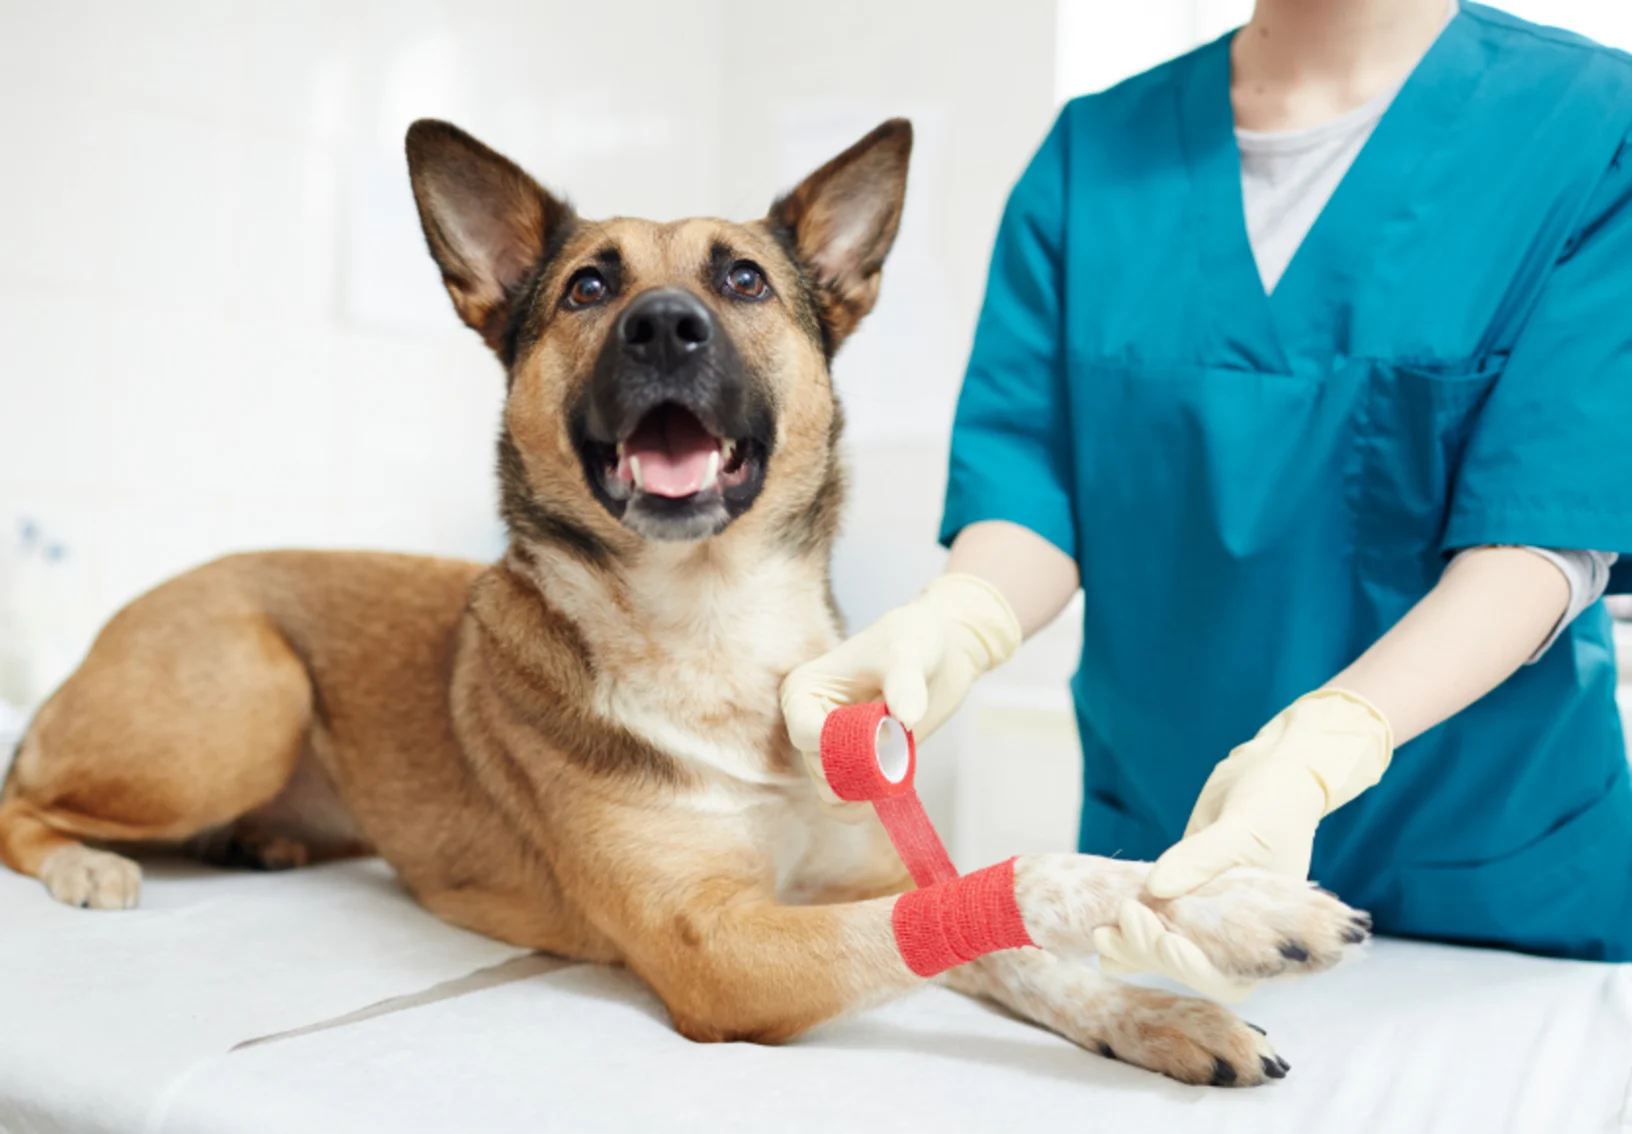 Staff wrapping red bandage on dog's paw